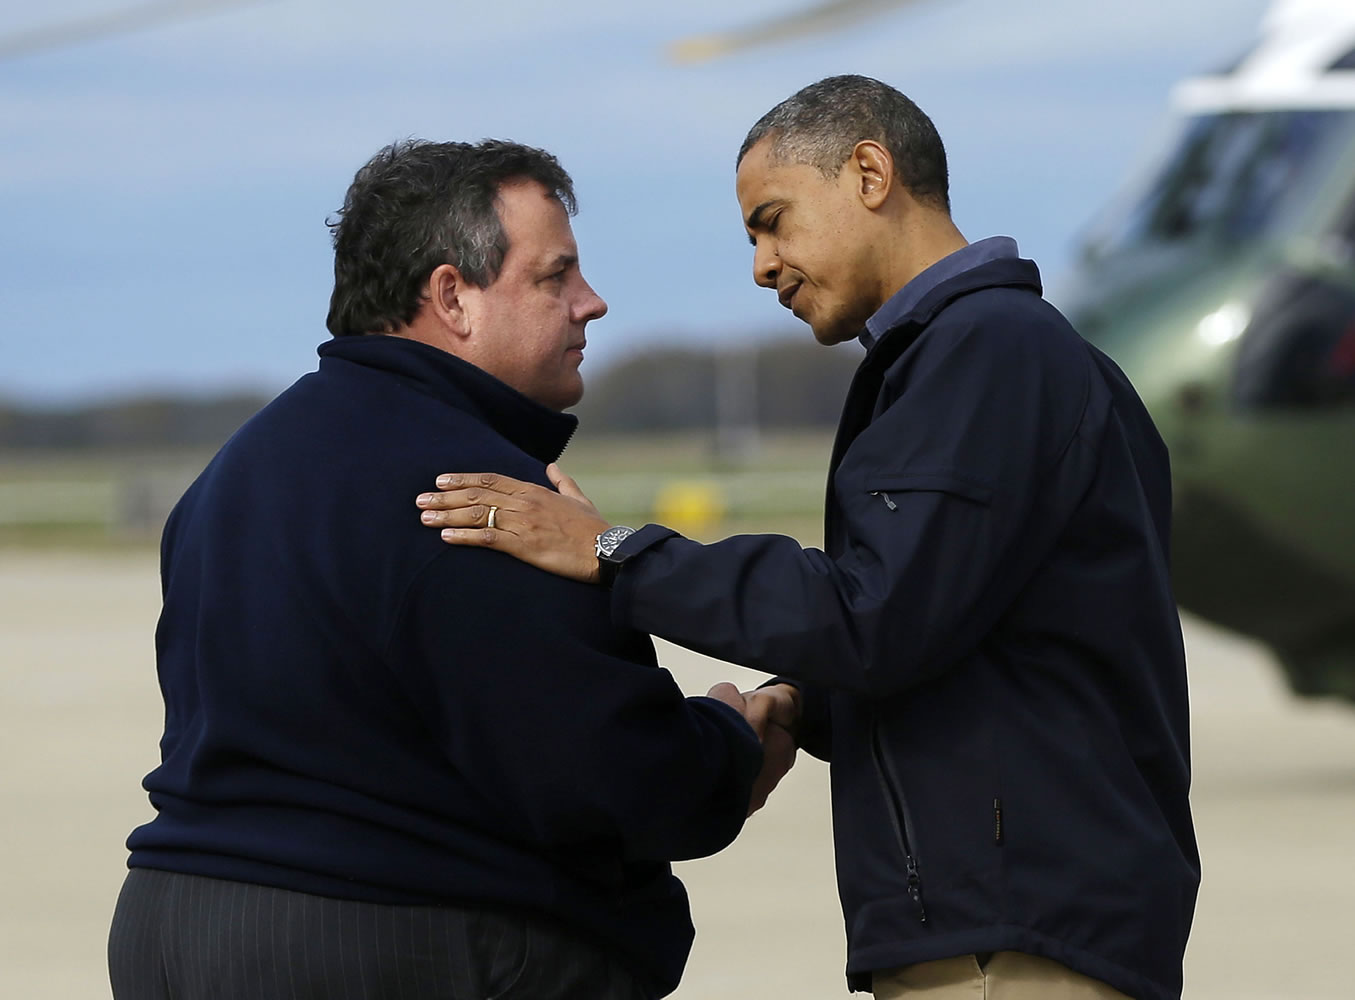 President Barack Obama is greeted Oct. 31 by New Jersey Gov. Chris Christie upon arrival at Atlantic City International Airport in Atlantic City, N.J., to visit areas damaged by Superstorm Sandy.